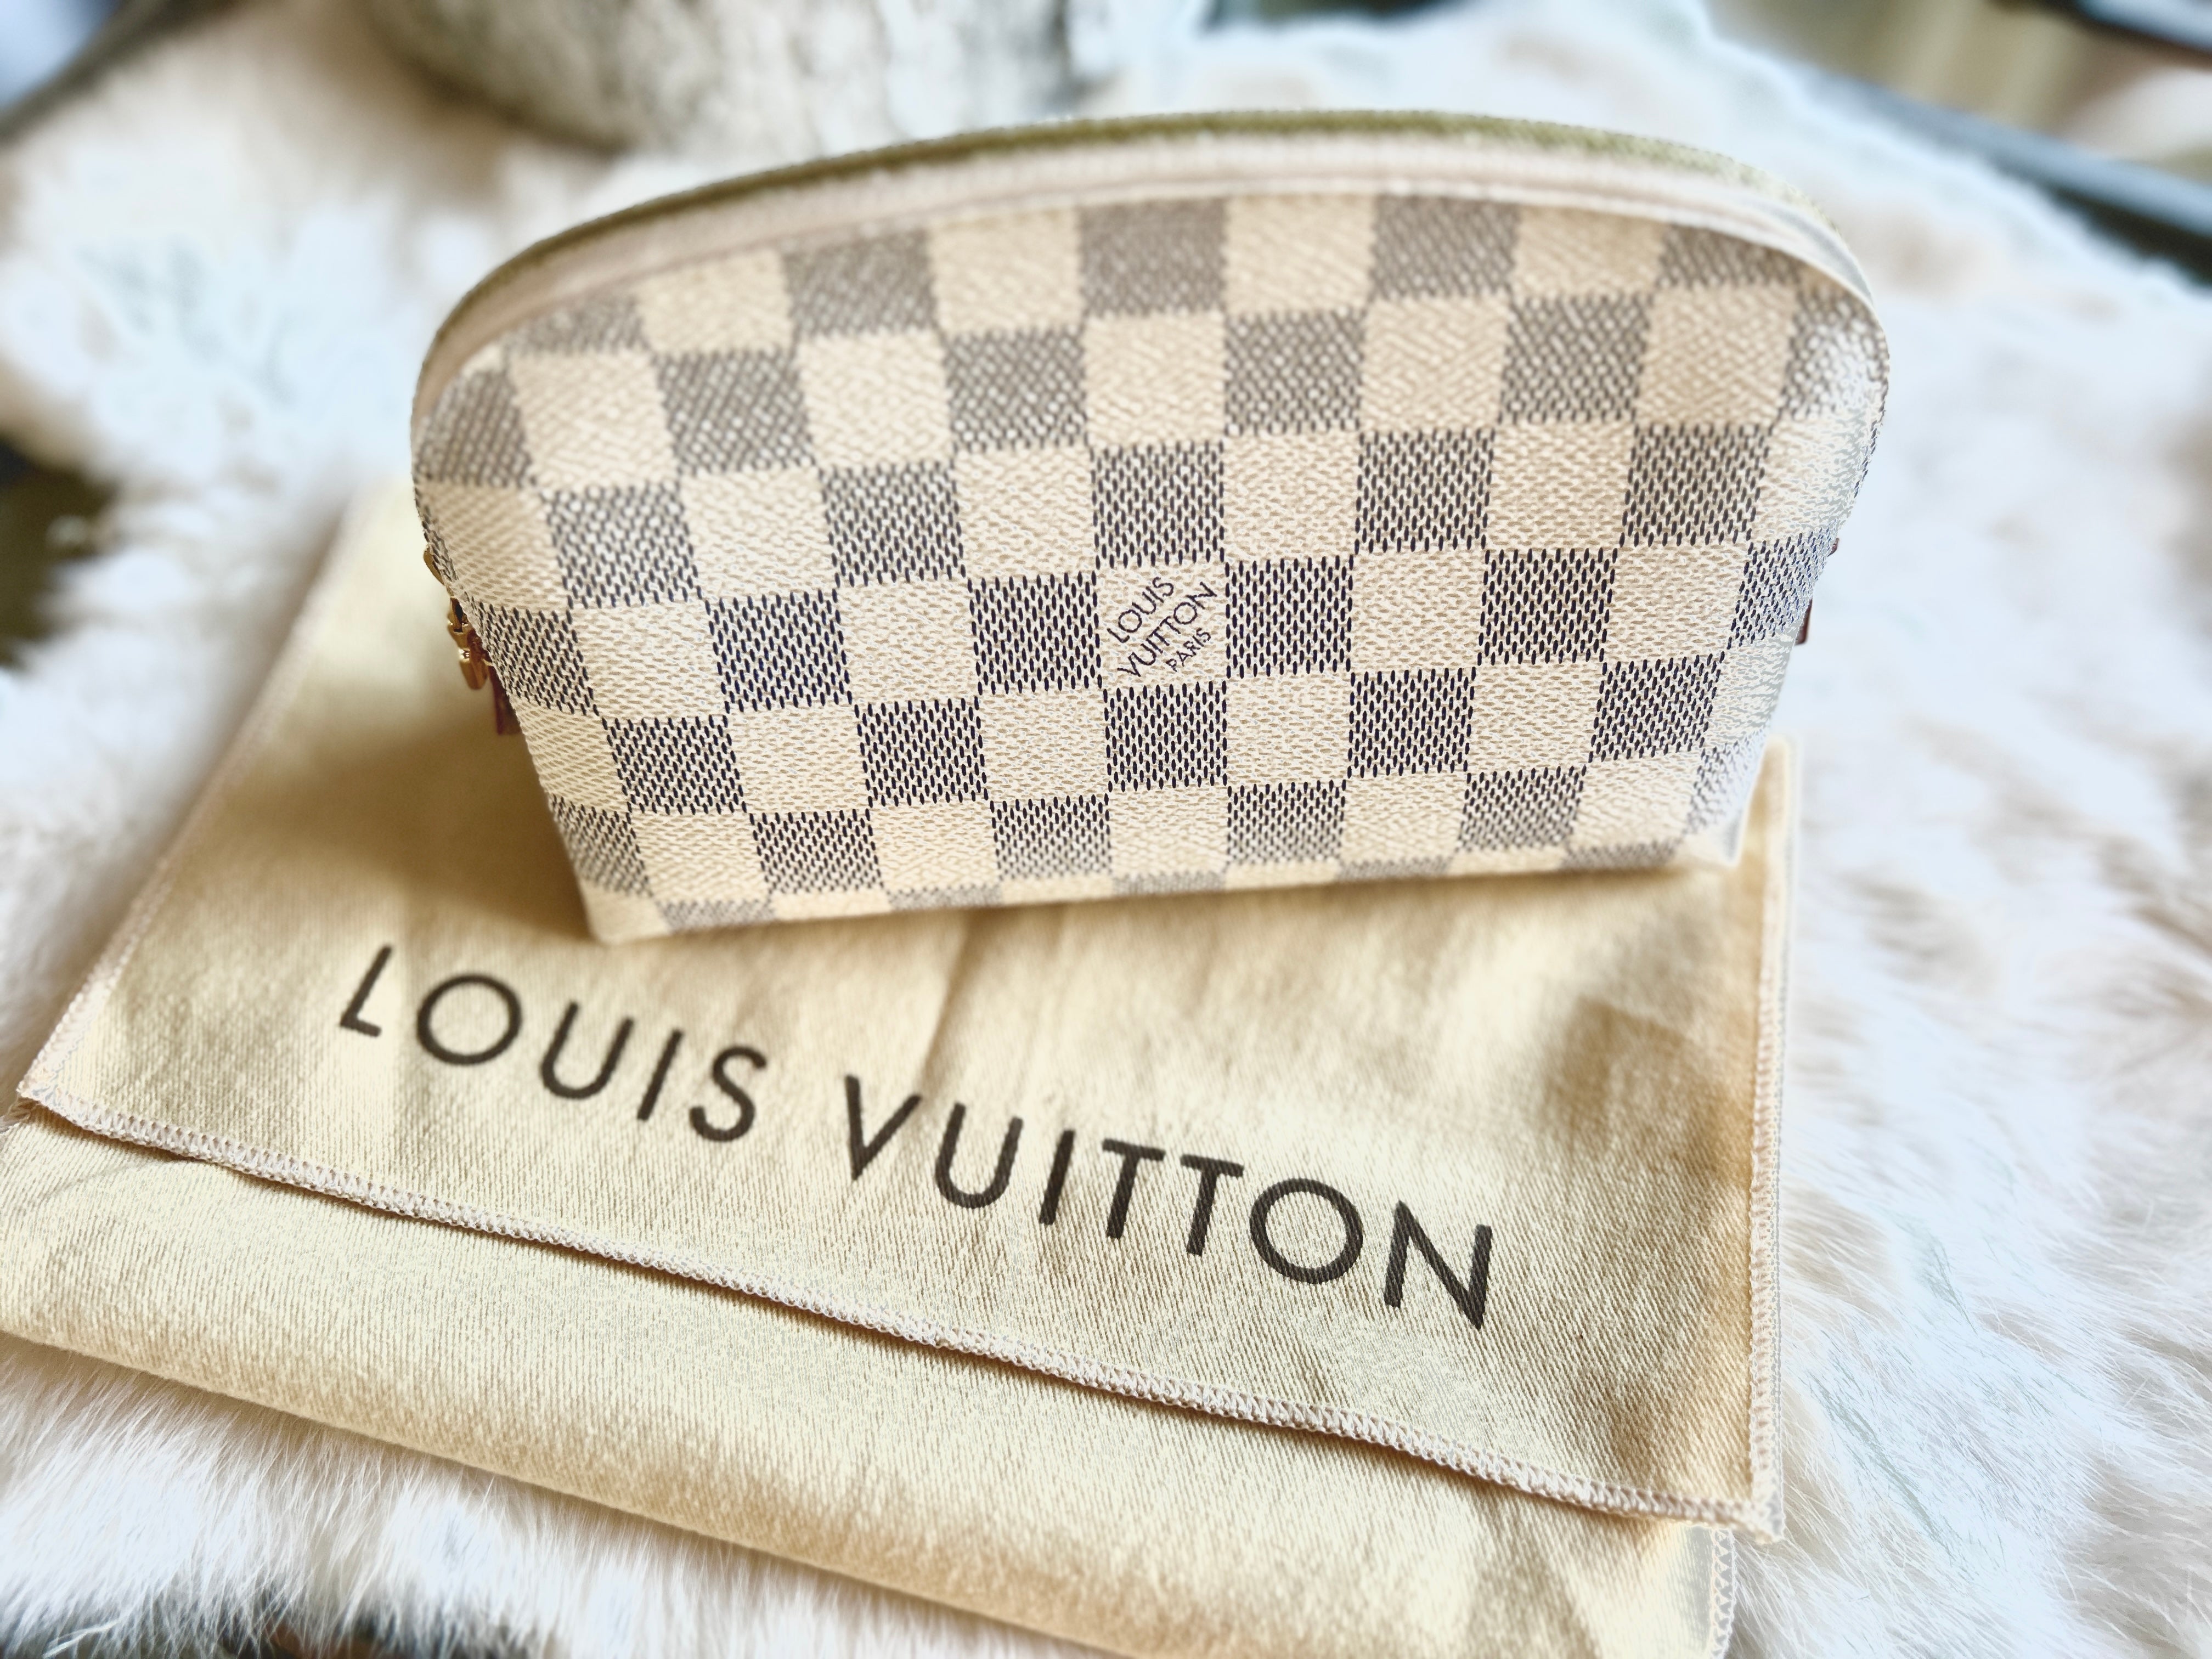 Like New! NEVER USED Louis Vuitton Monogram Damier Azur Cosmetic